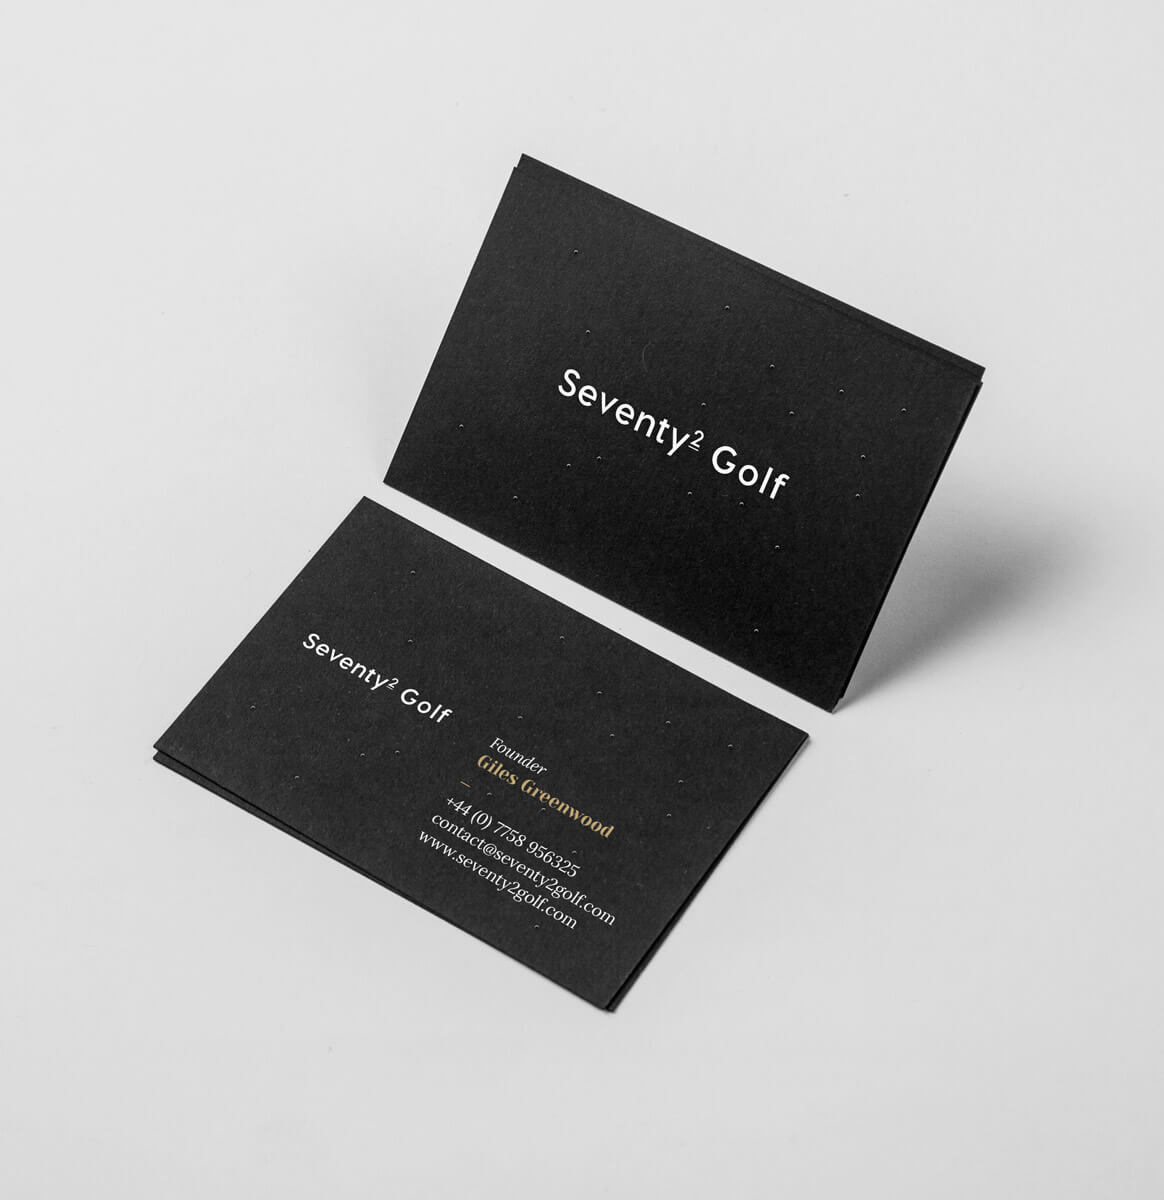 A few black business cards featuring the logo and contact details printed in white with a gold accent